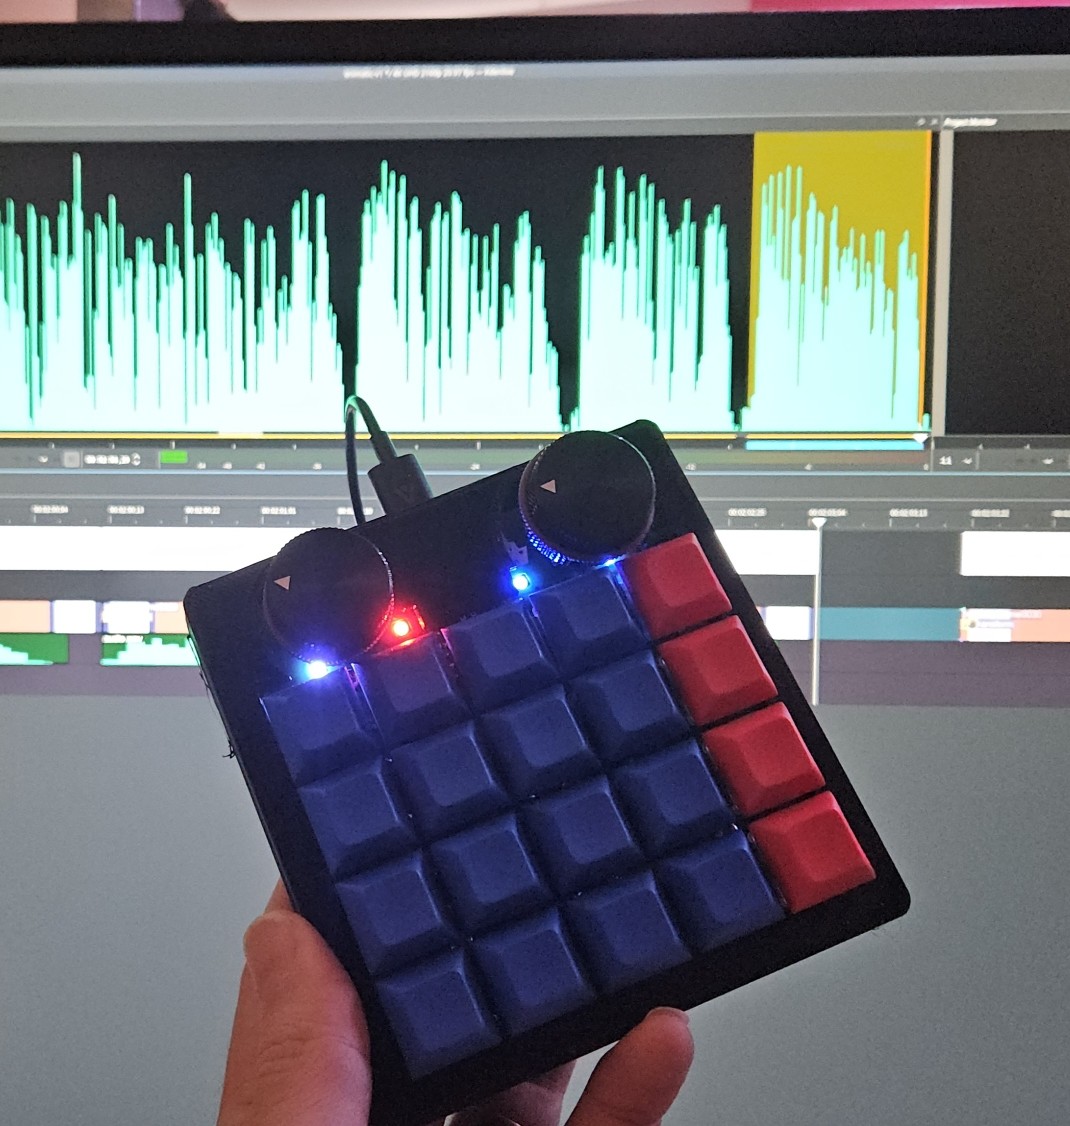 A 5x4 macropad with two large dials and some LEDs in front of a monitor with Kdenlive running.